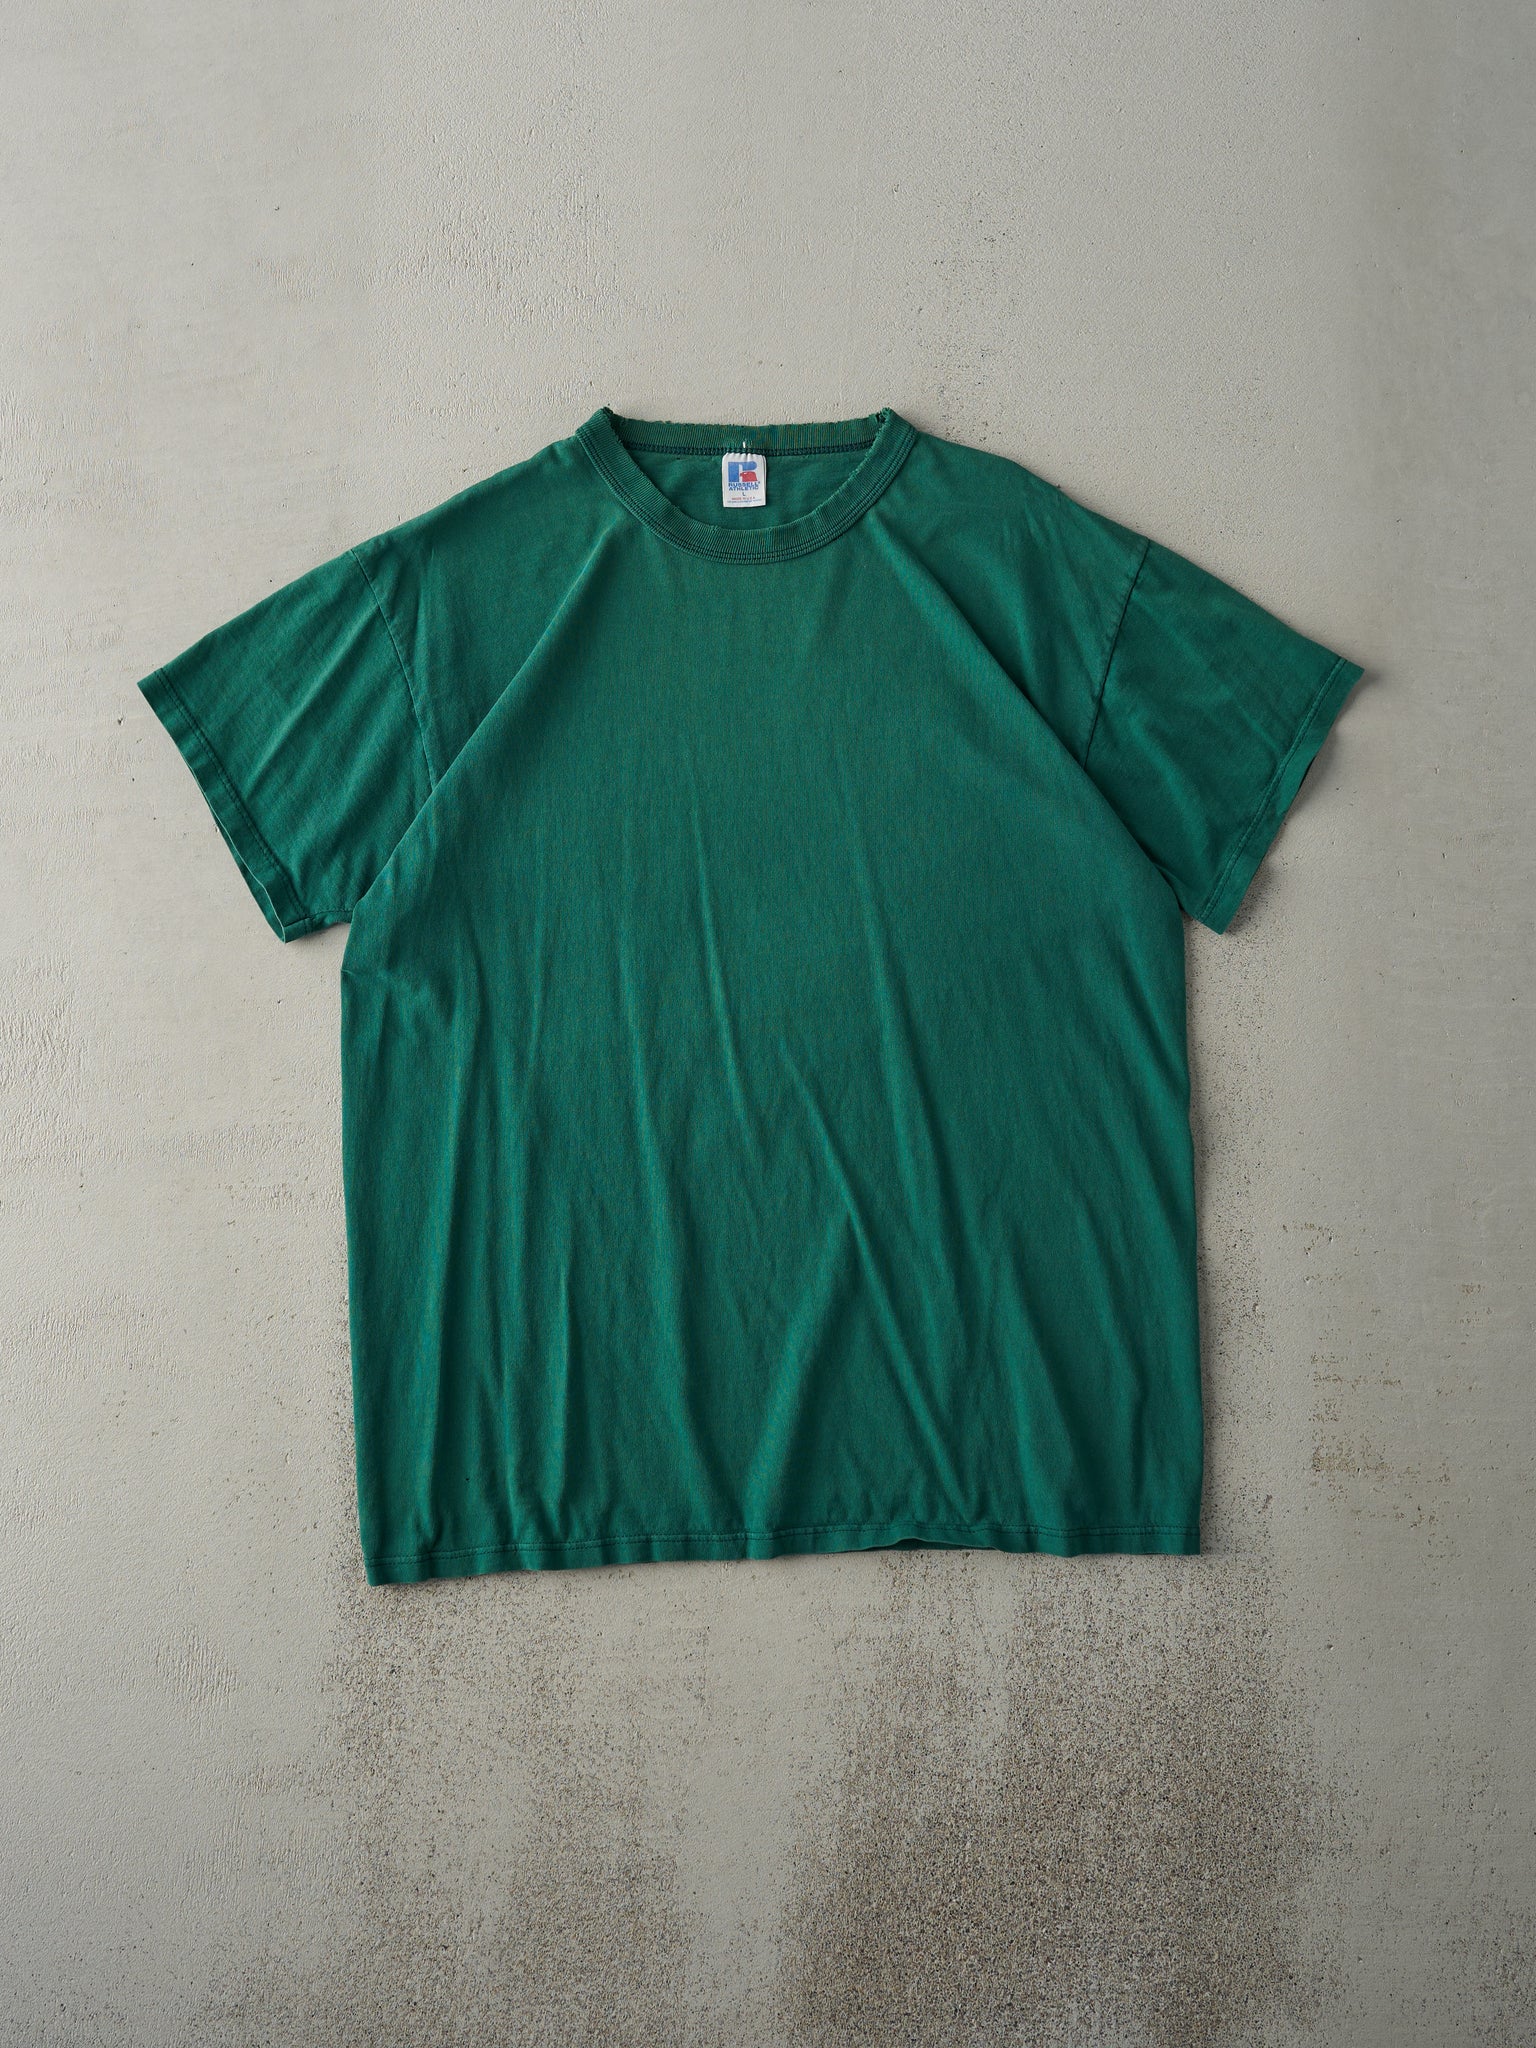 Vintage 90s Forest Green Russell Athletics Blank Tee (M)